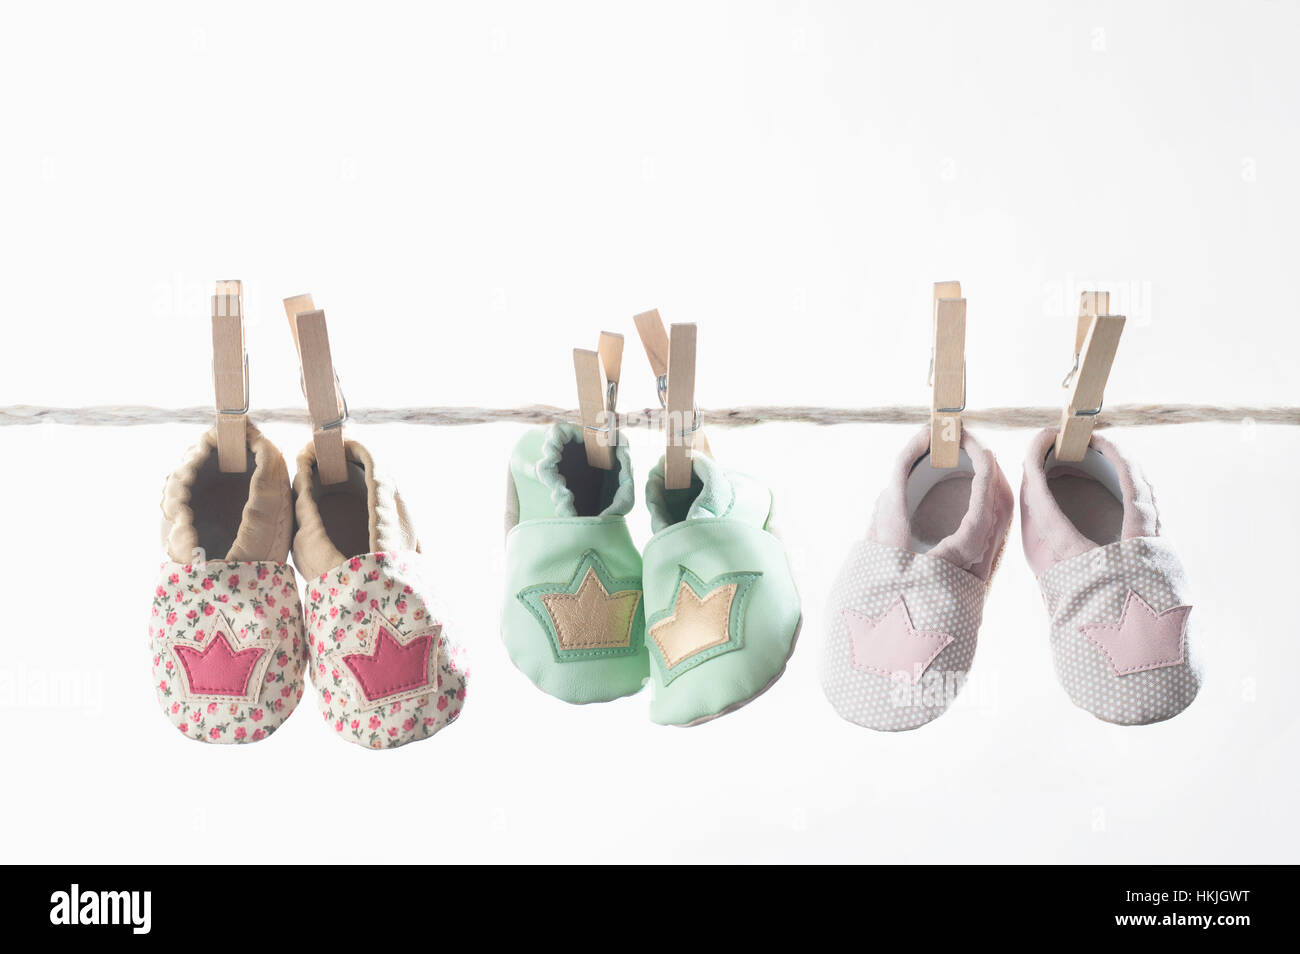 Three pairs of baby shoes hanging on clothes line, Bavaria, Germany Stock Photo